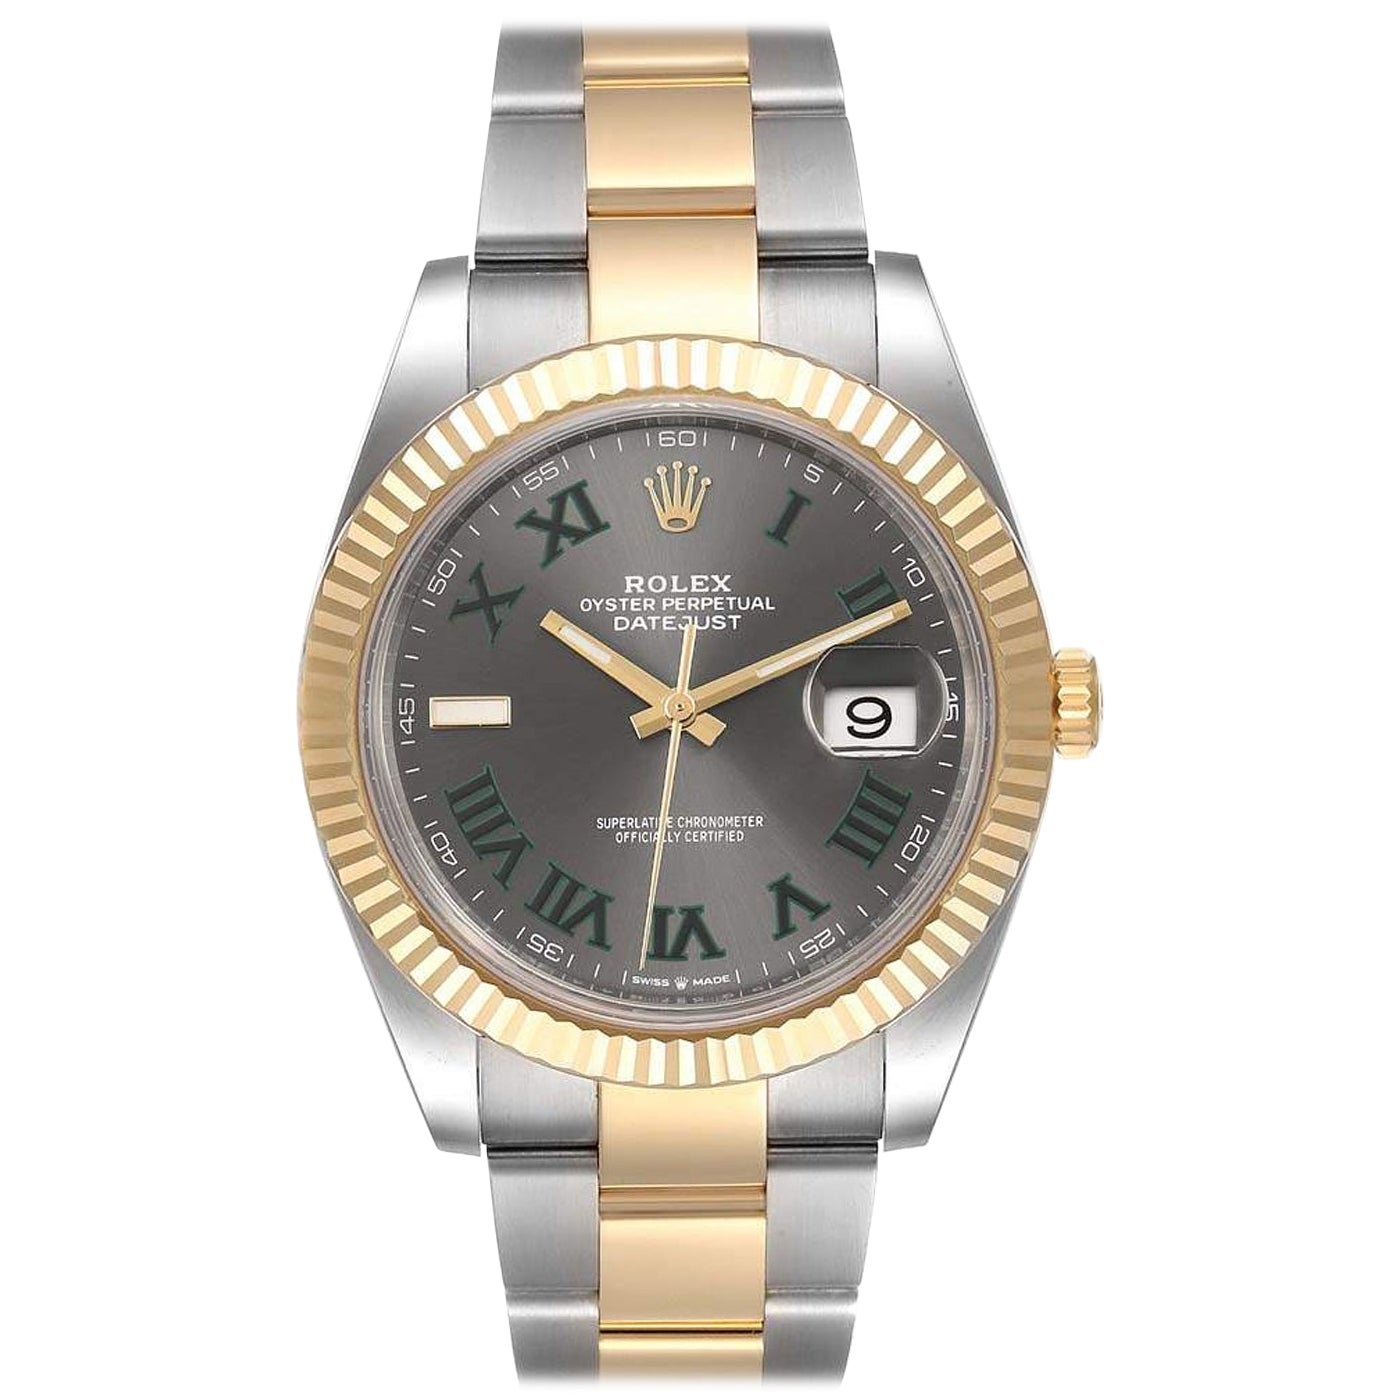 Rolex Datejust Two Tone Wimbledon Dial Oyster Fluted Men's Watch 126333